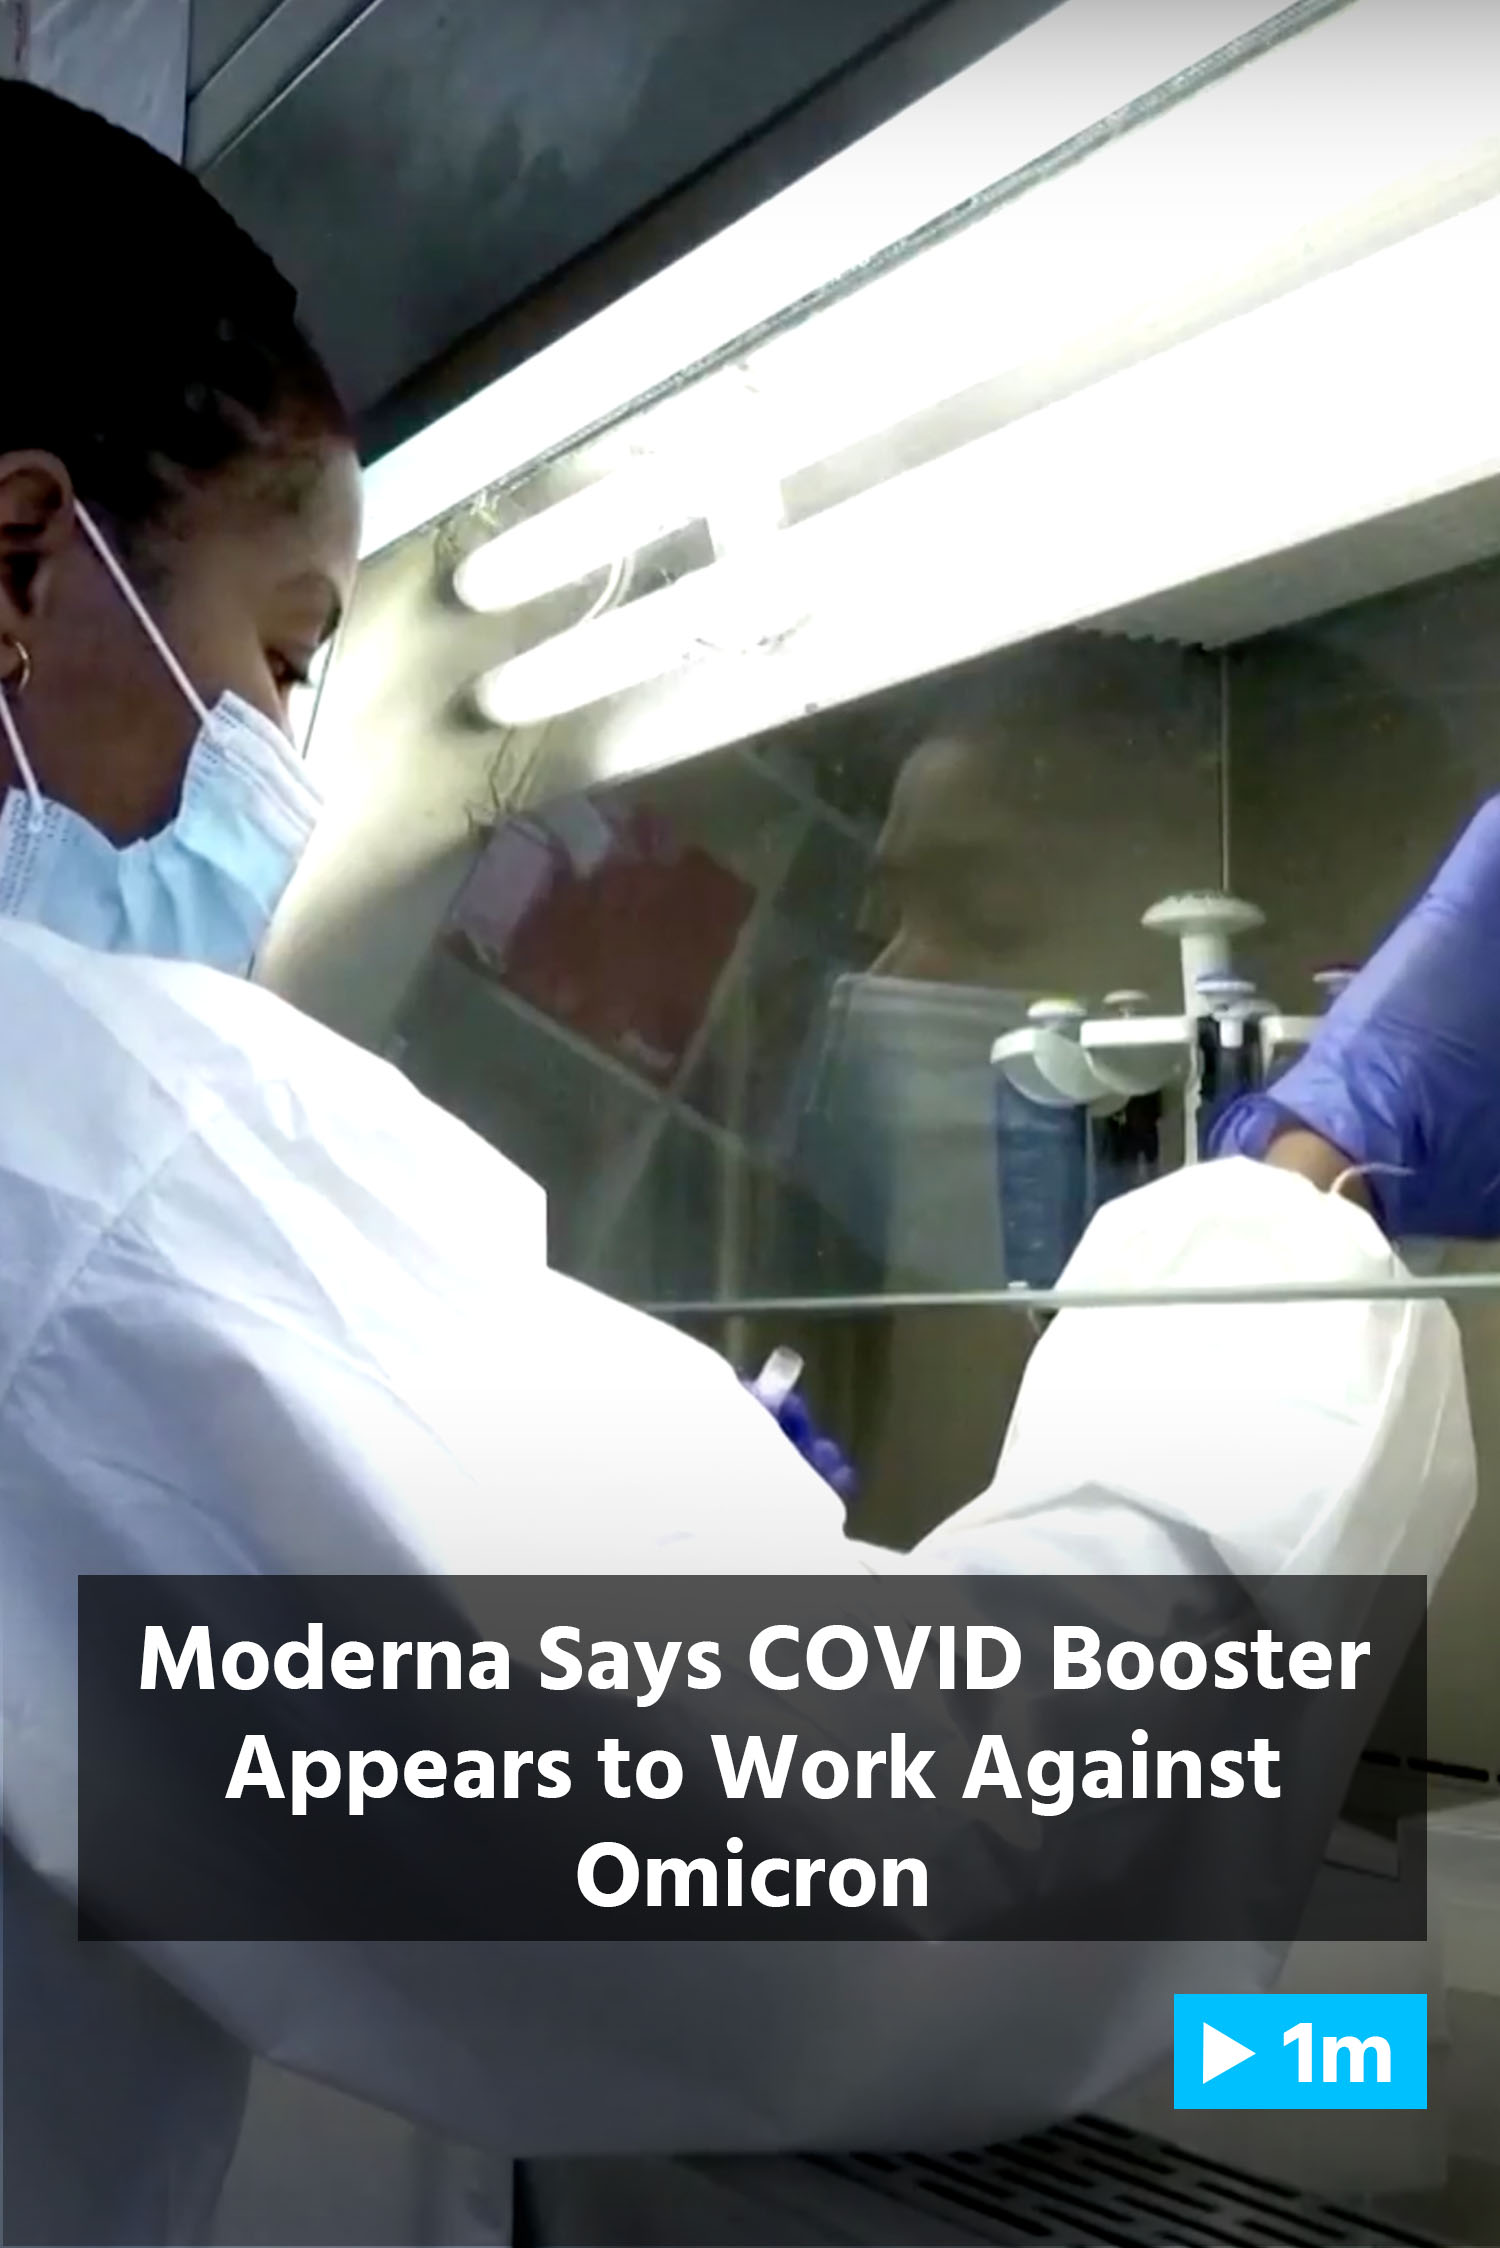 Moderna says COVID booster appears to work against Omicron